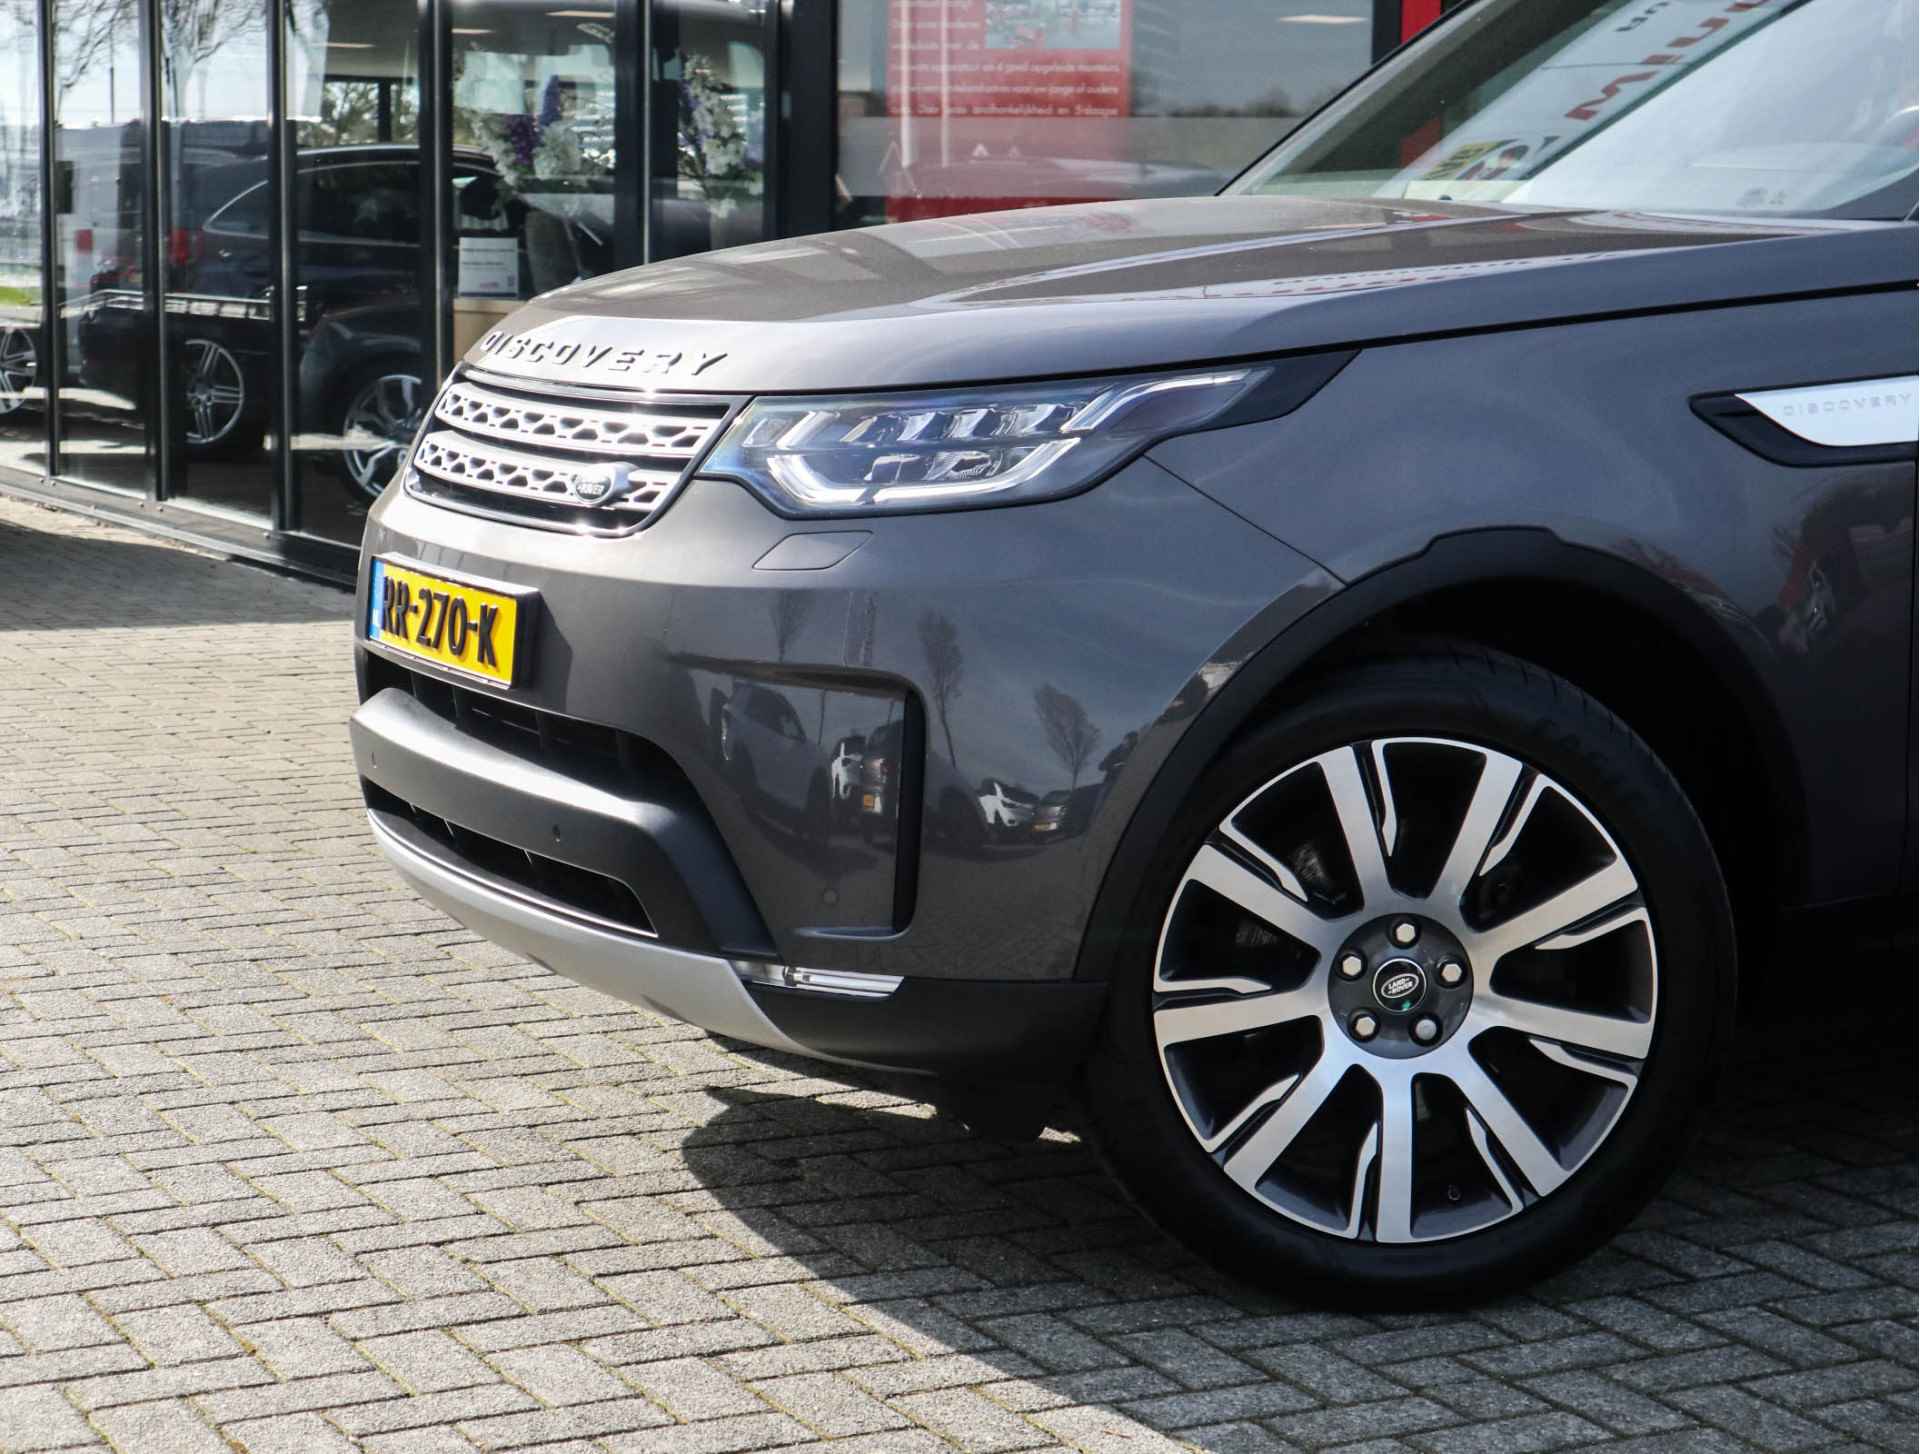 Land Rover Discovery 2.0 Sd4 HSE Luxury 7p. Navi/Clima/Leder/Panodak/7-Persoons/Luchtvering/Trekhaak - 4/34